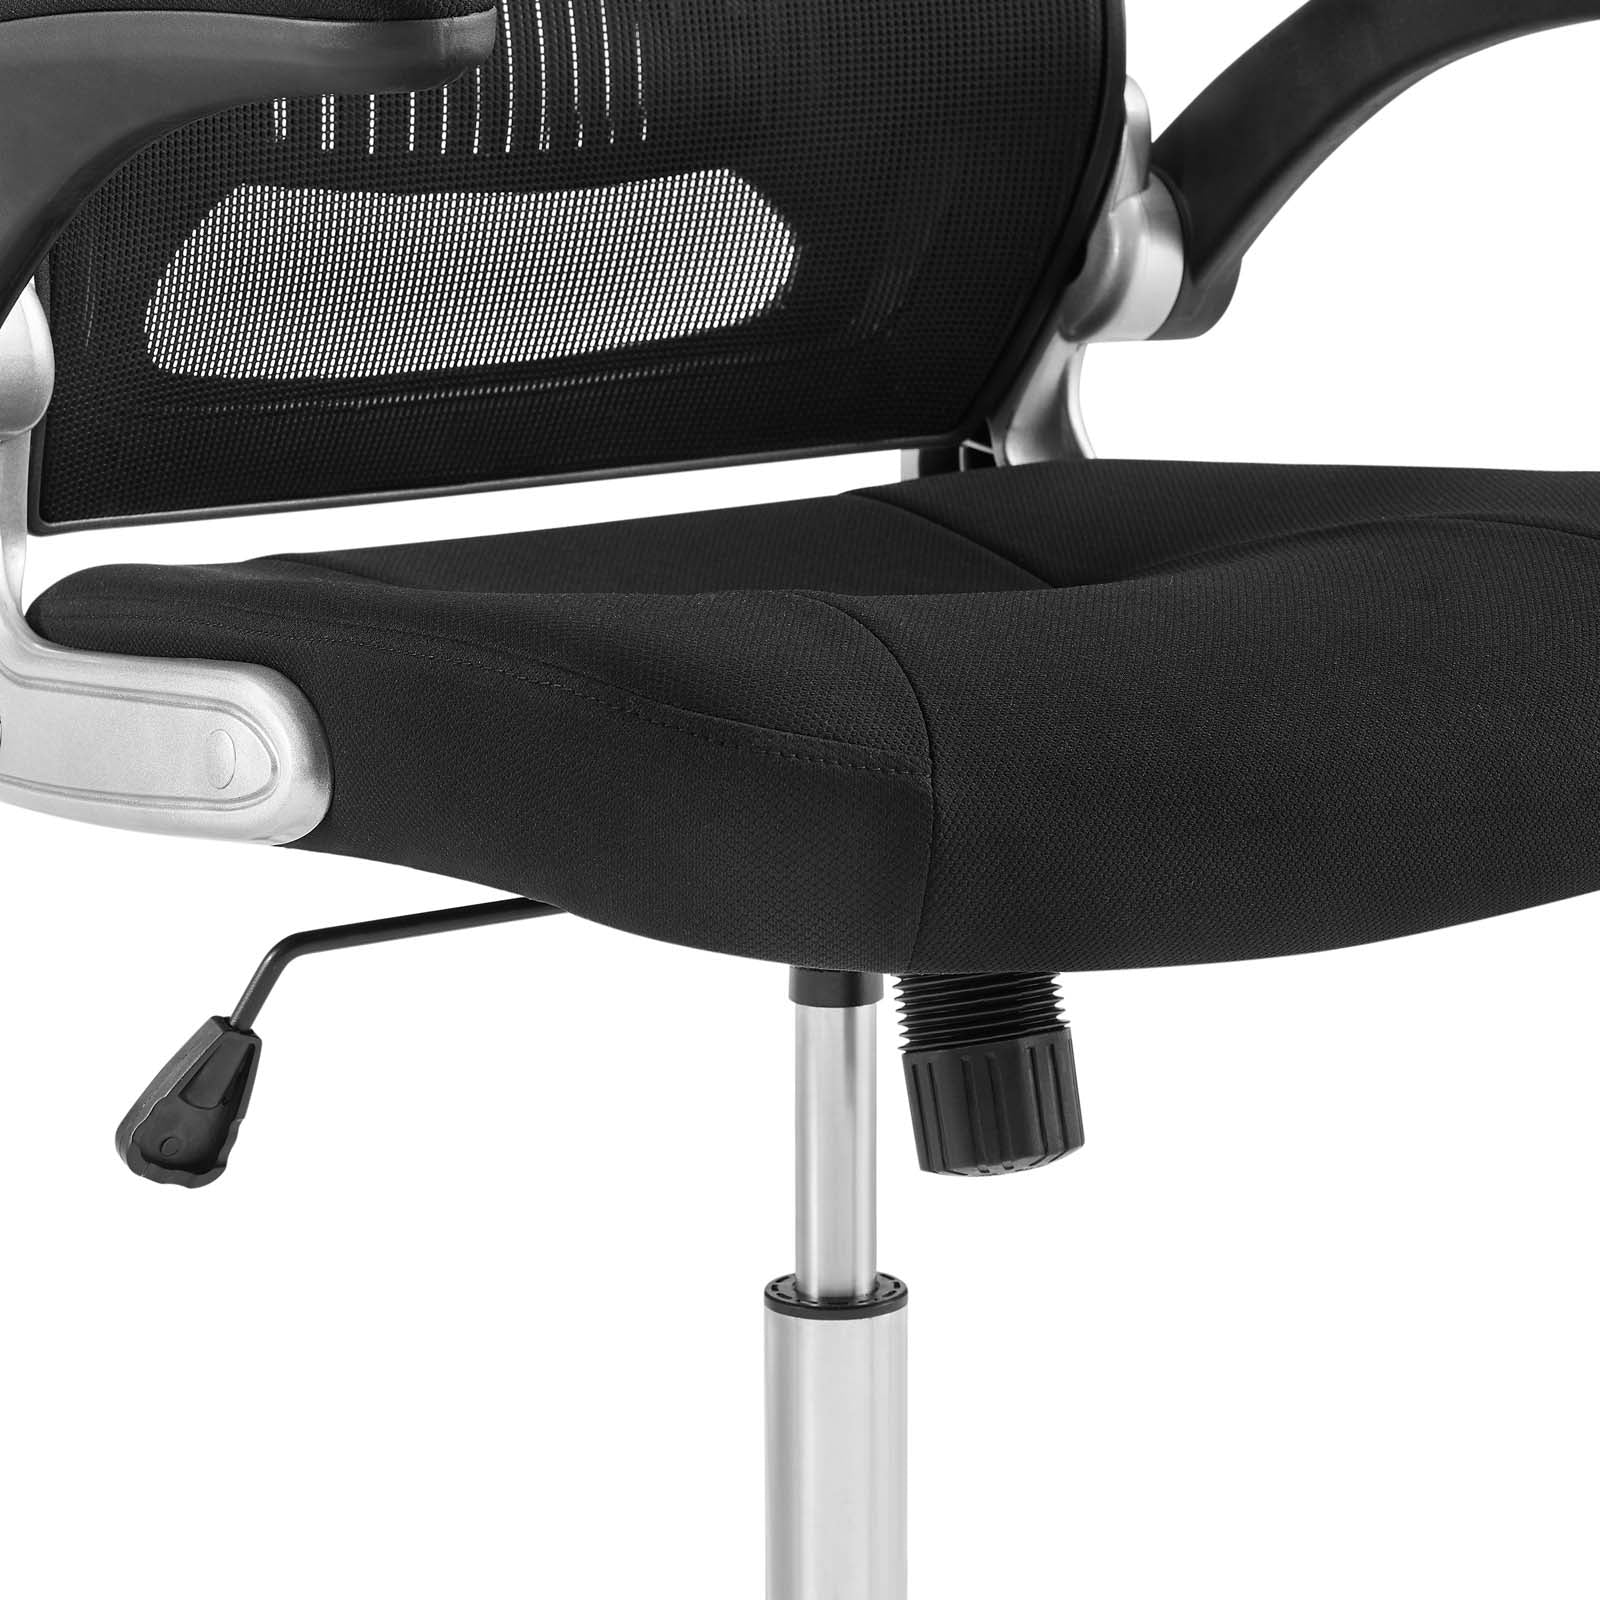 Modway Task Chairs - Expedite Highback Office Chair Black